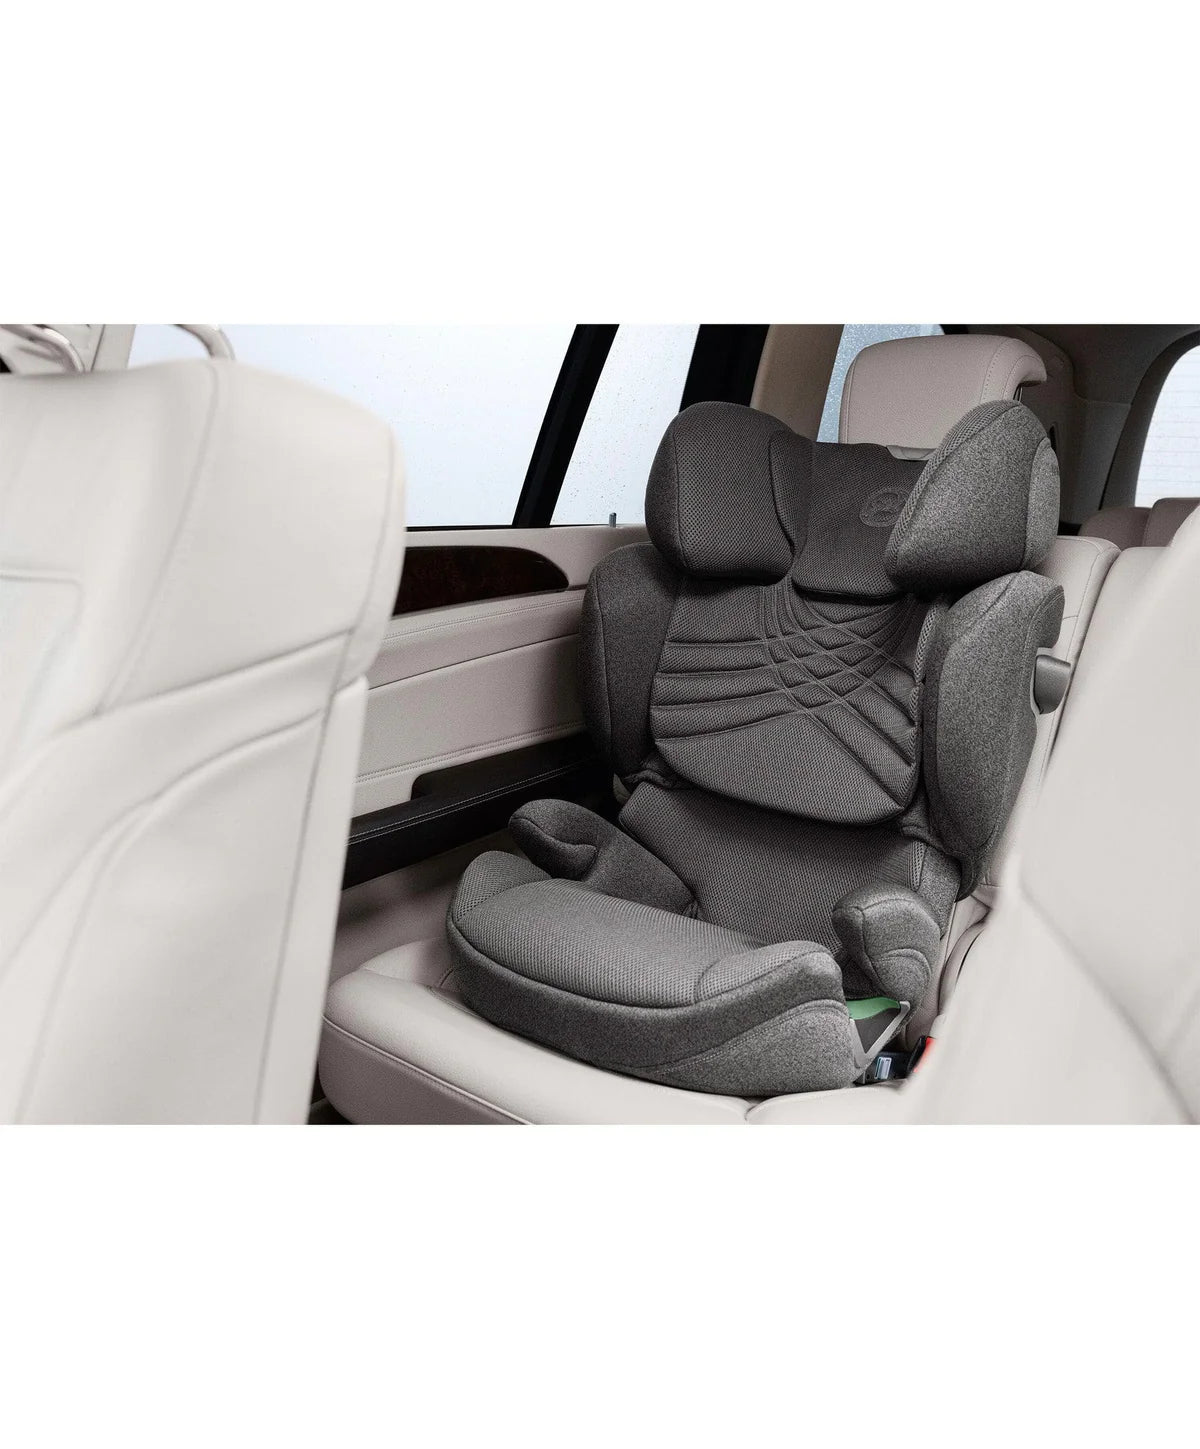 CYBEX Solution T i-Fix High-back Booster Car Seat